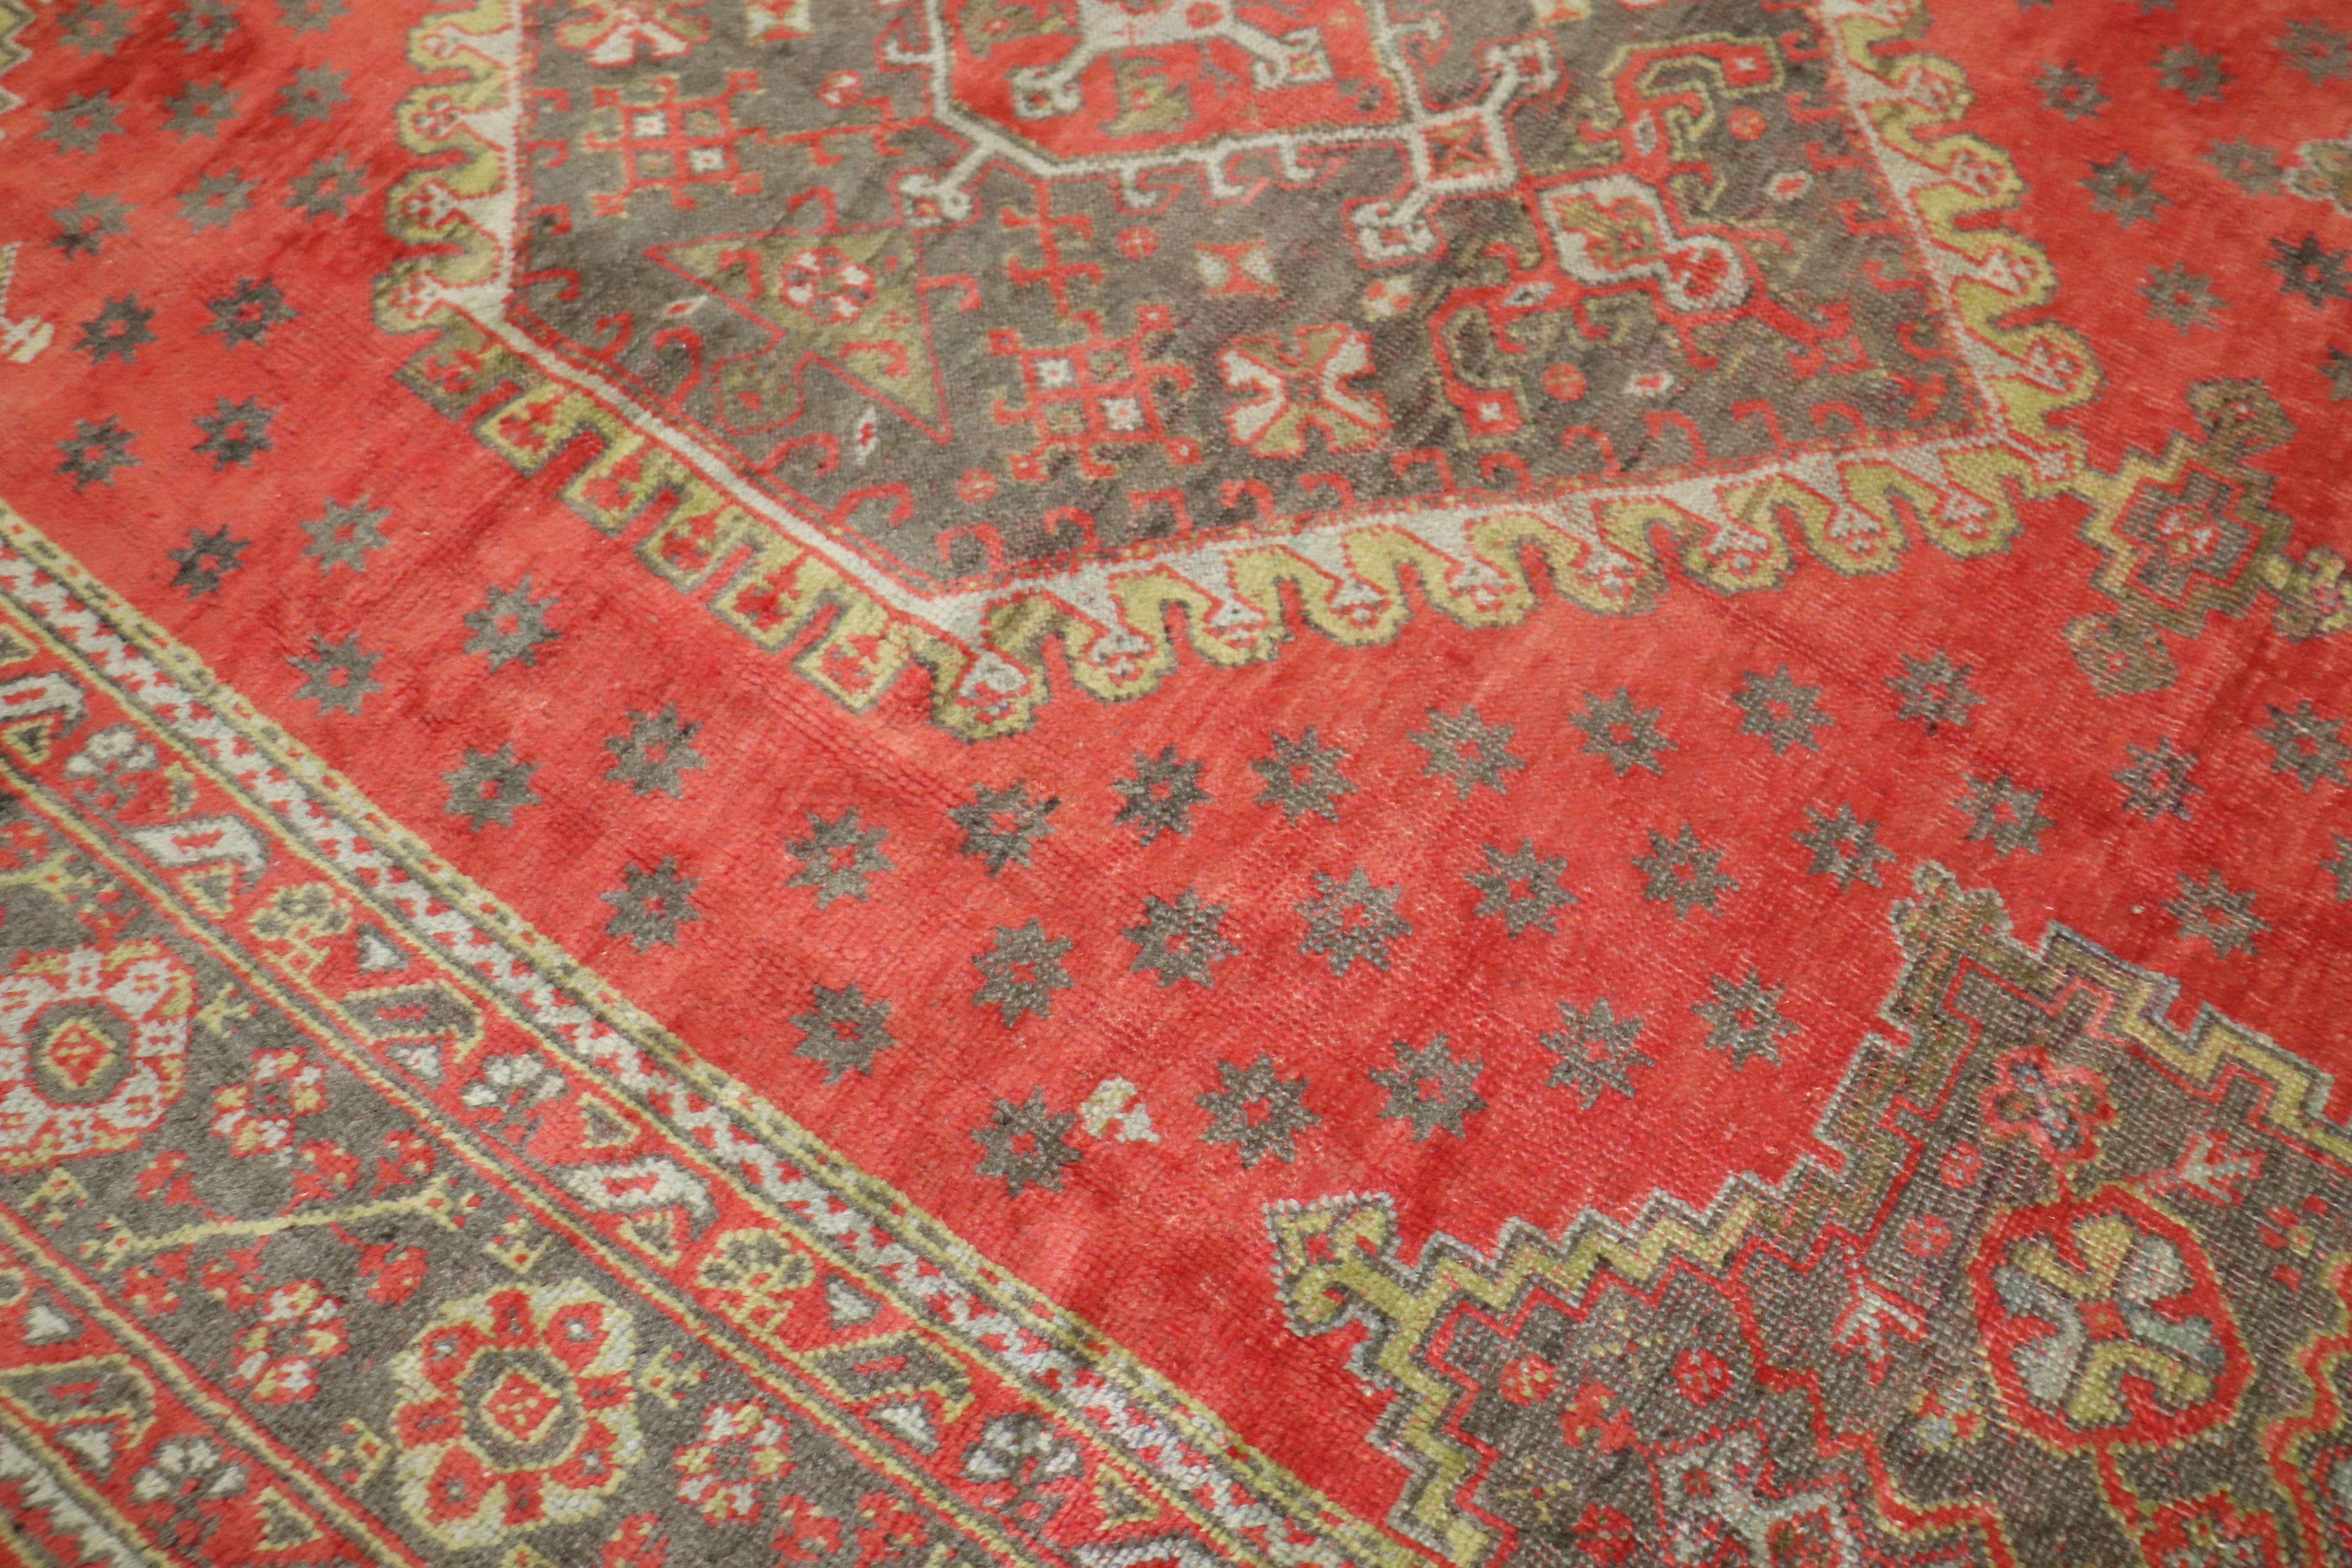 Hand-Woven Traditional Antique Turkish Oushak Carpet, 20th Century For Sale